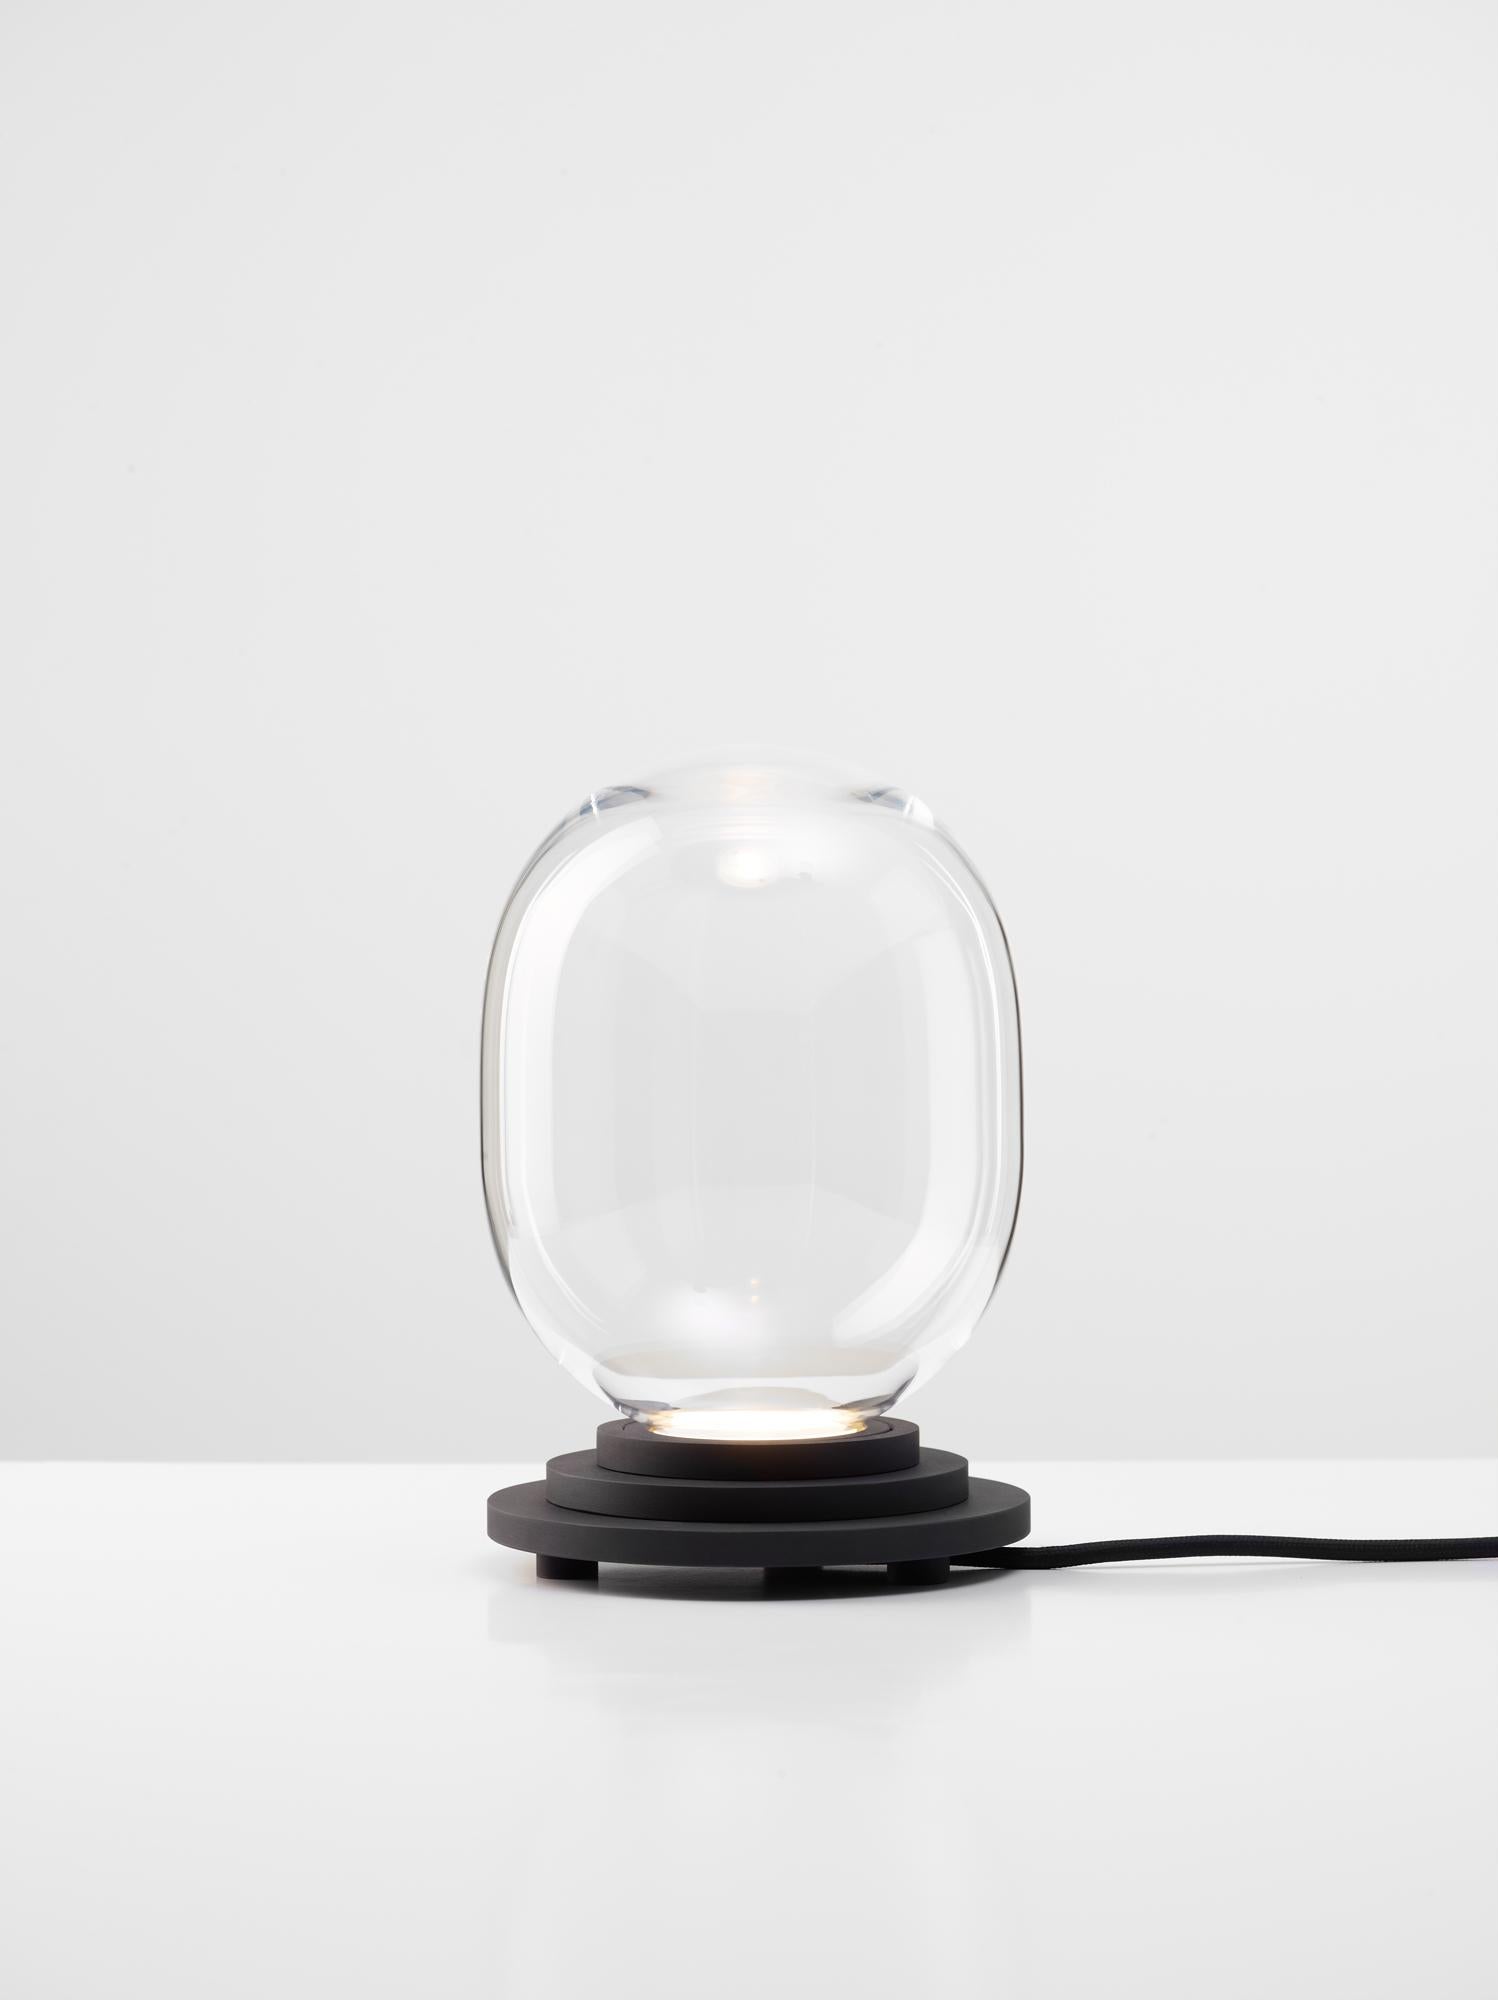 Set of 2 black and clear Stratos capsule table light by Dechem Studio
Dimensions: D 15 x H 22 cm
Materials: Aluminum, glass.
Also available: Different colours available

Different shapes of capsules and spheres contrast with anodized alloy